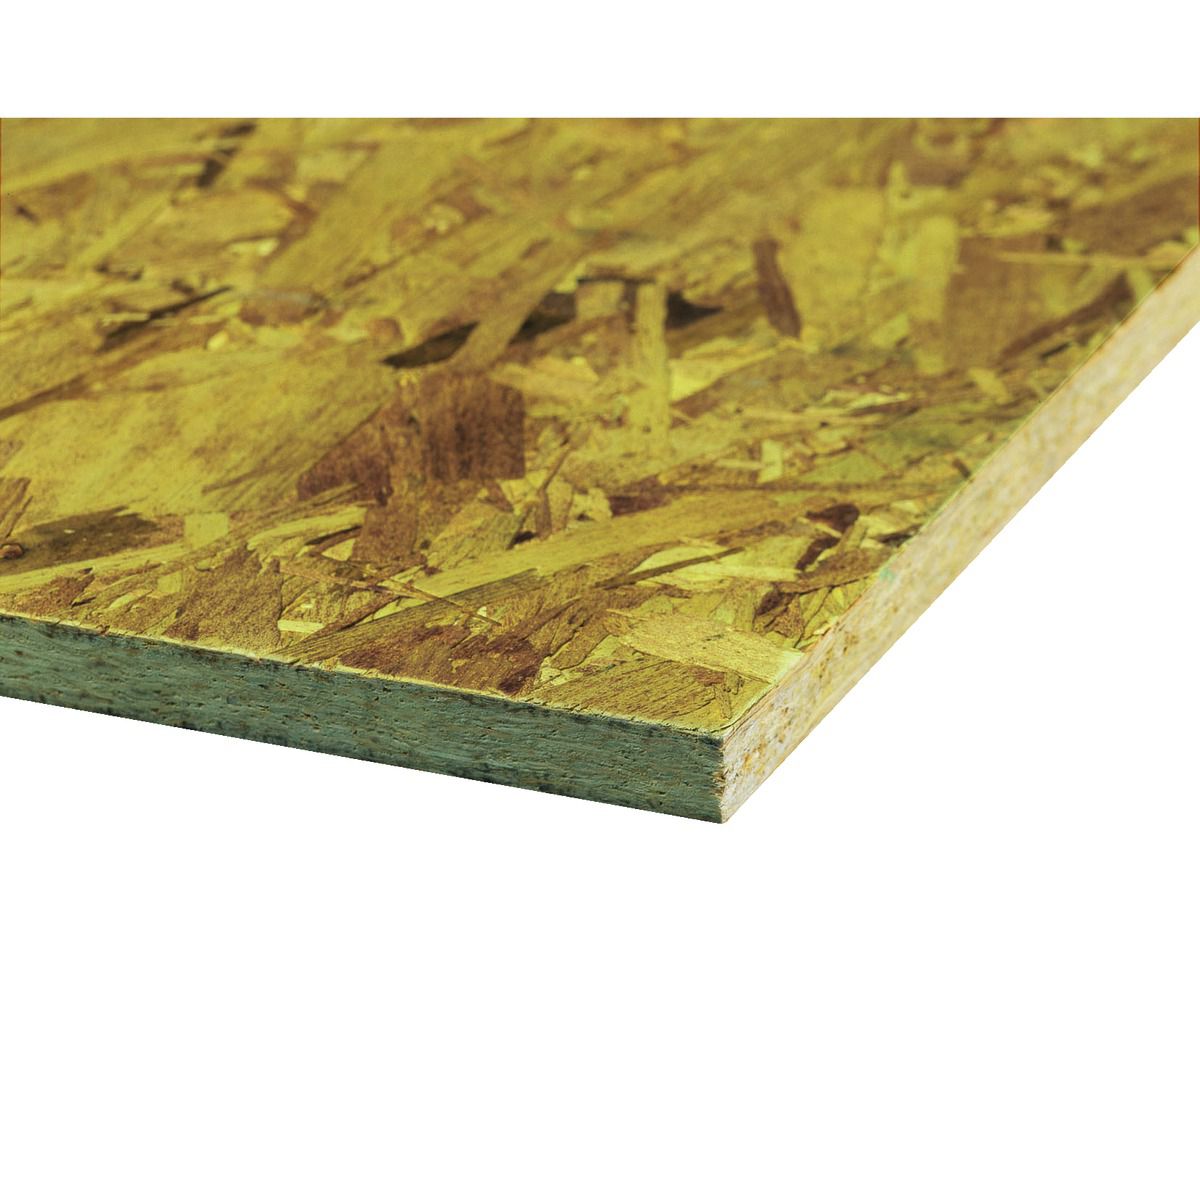 Image of Wickes General Purpose Oriented Strand Board 3 (OSB 3) - 9 x 1200 x 2400mm